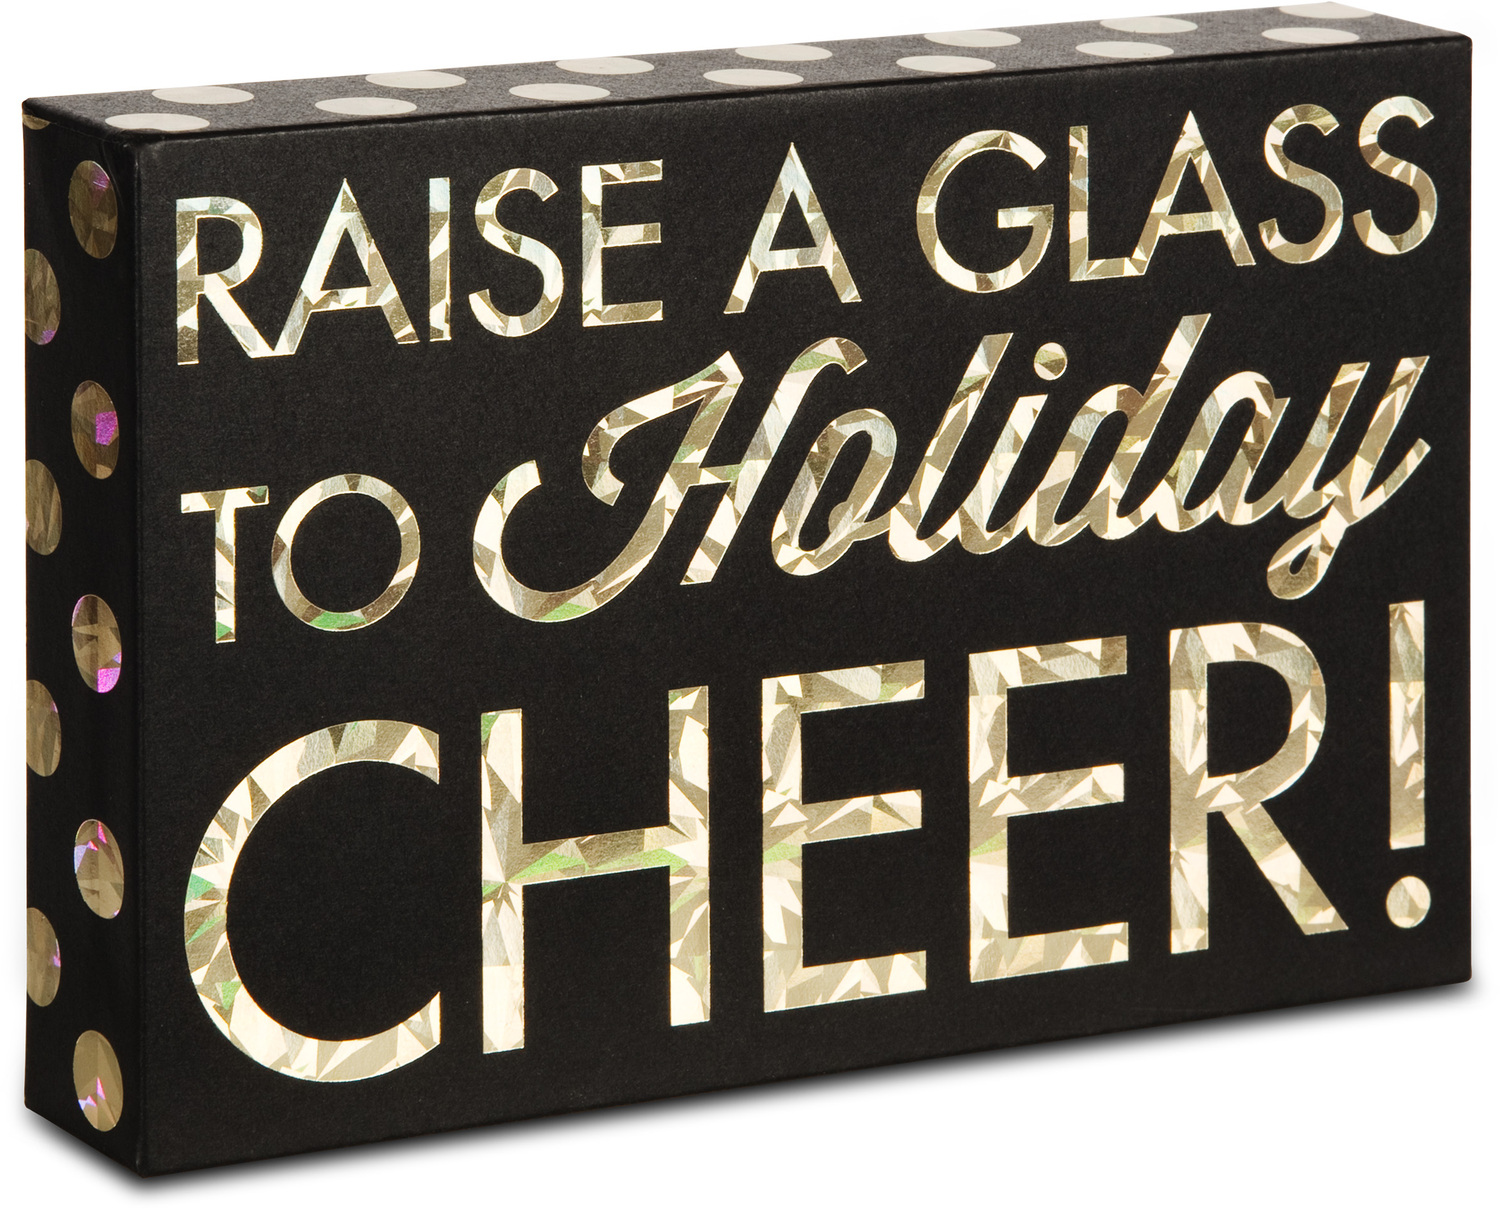 Holiday Cheer by Hiccup - Holiday Cheer - 6" x 4" Plaque